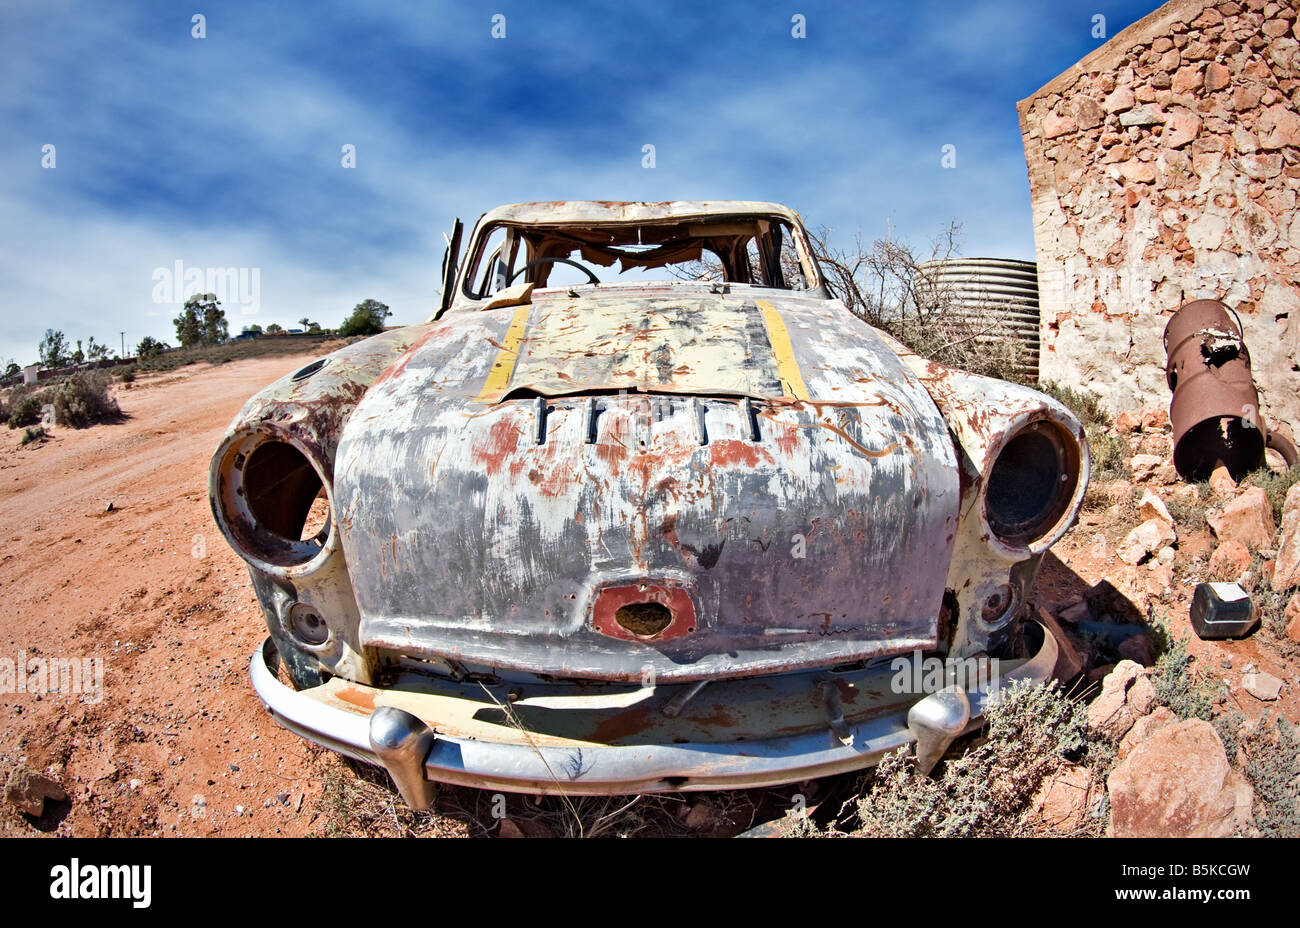 great image of an old car rusting away in the desert Stock Photo